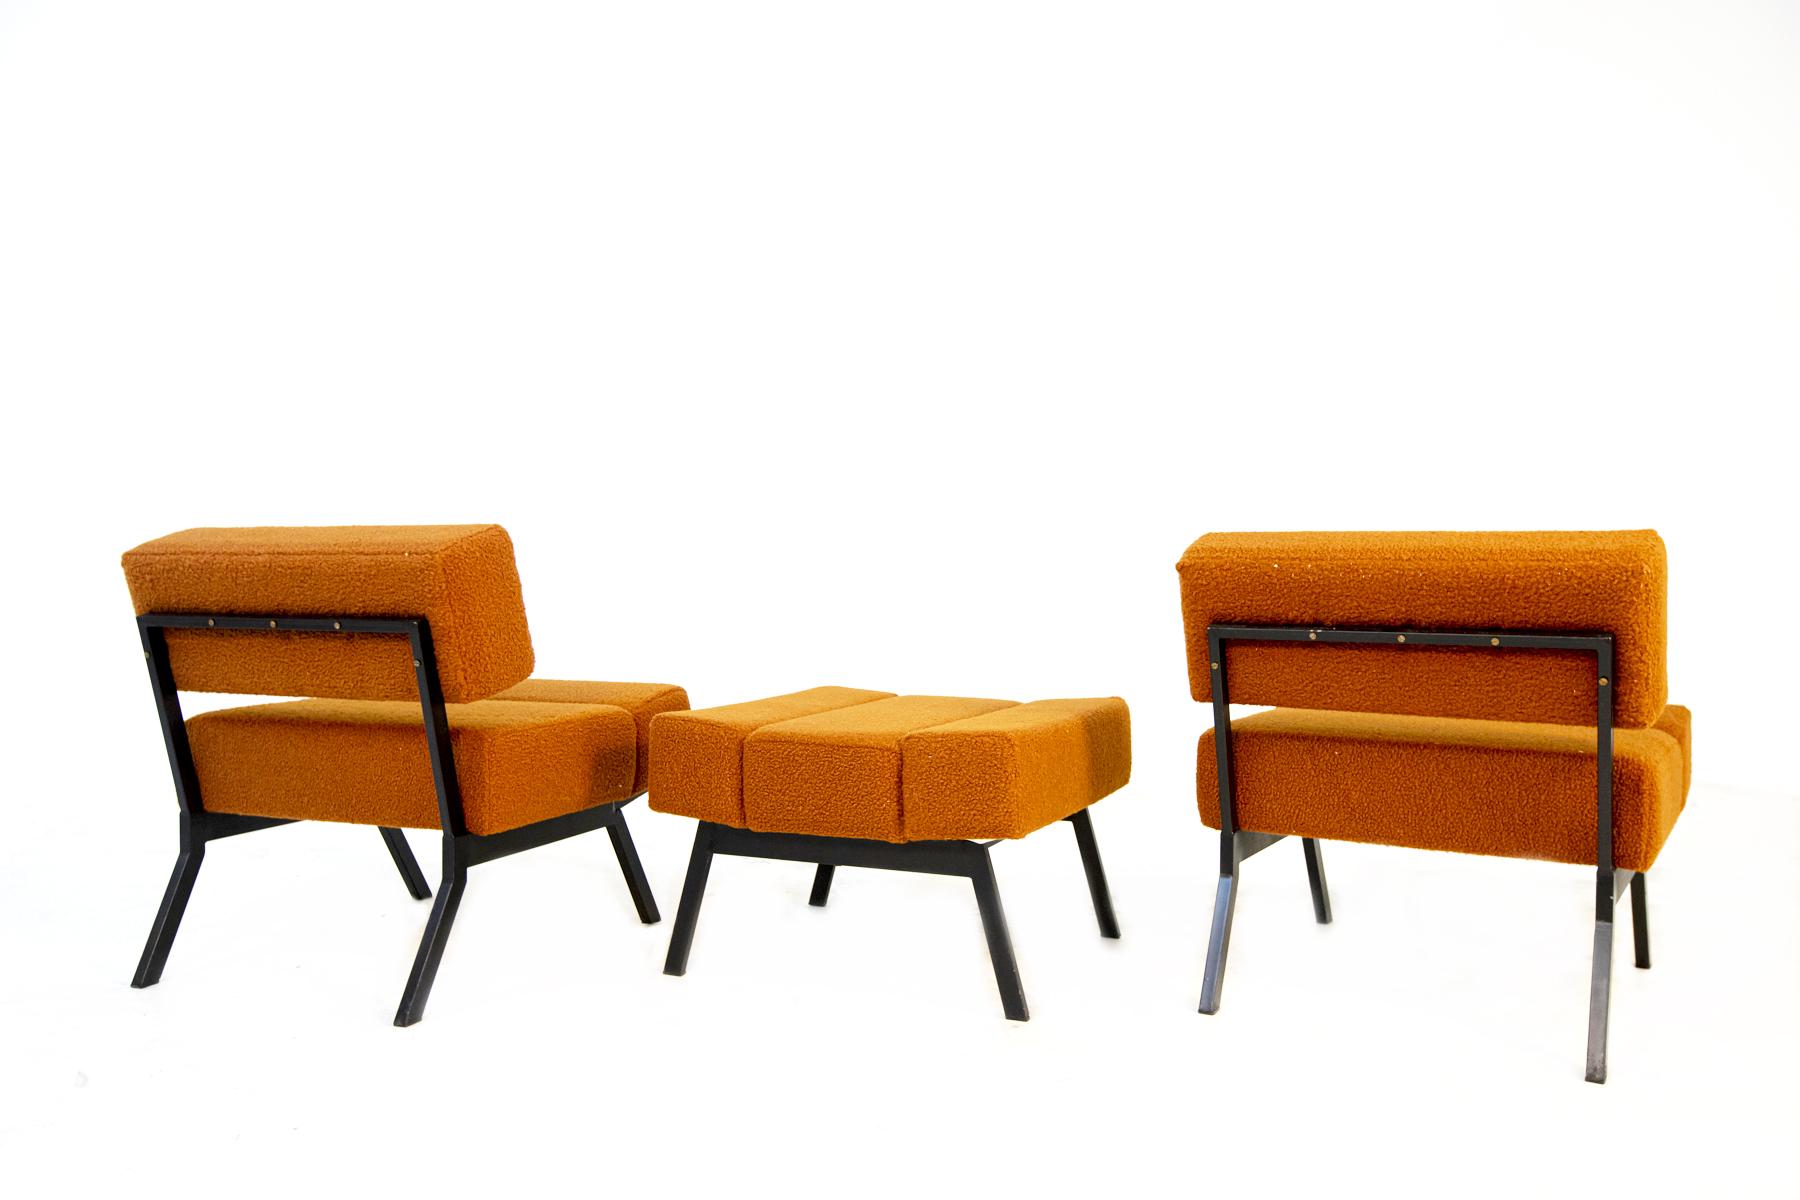 Beautiful set composed of two armchairs and a footstool by Rito Valla for IPE from the 1960s.
The Rito Valla set was made of dark orange bouclé fabric for the upholstery, and black painted aluminum for the frame.
The chairs do not recline, but are